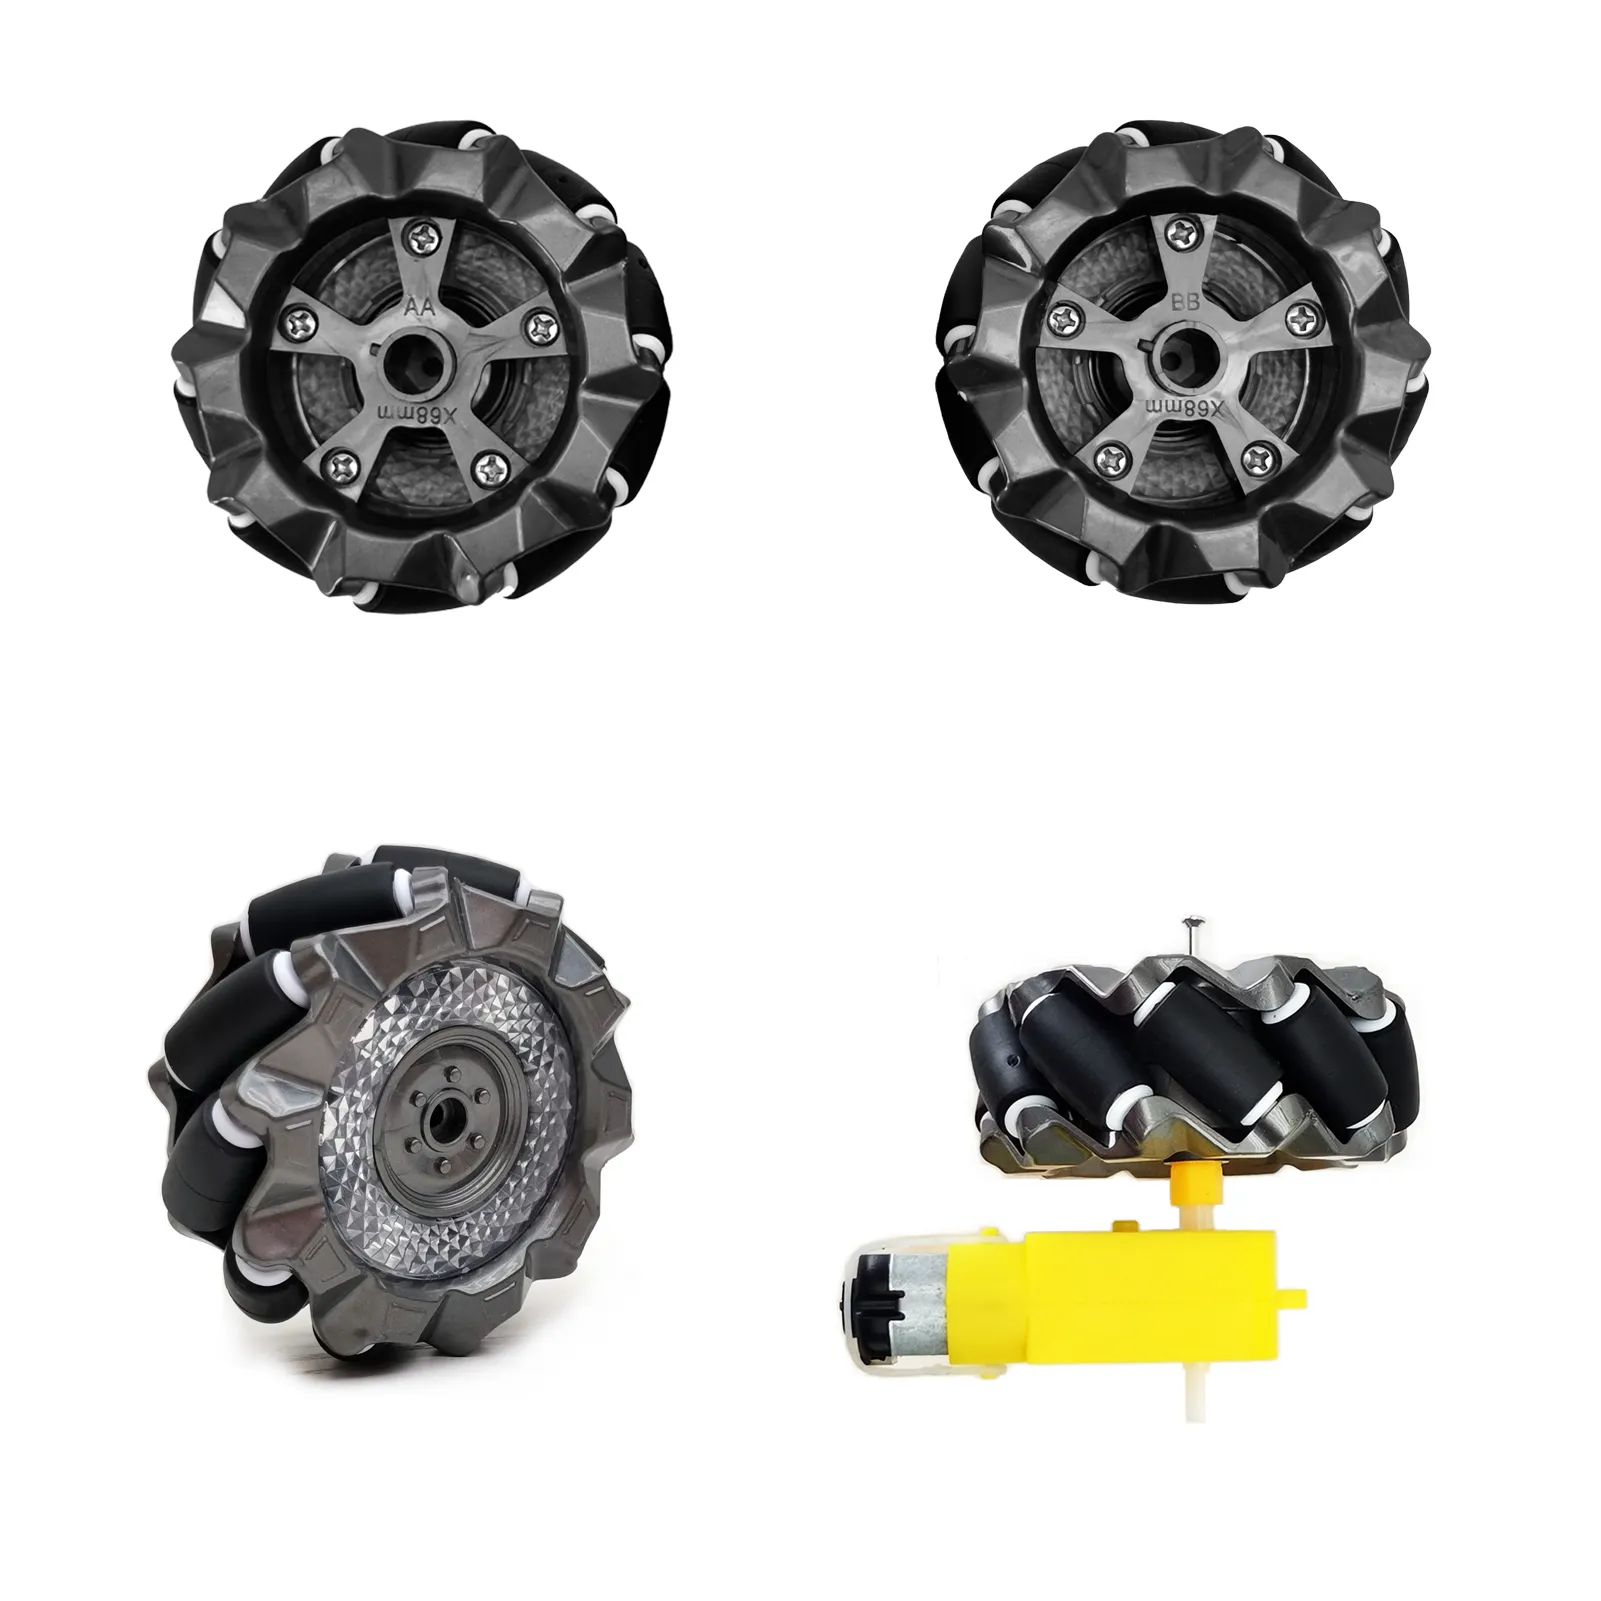 DIY Mecanum Wheel Car Kit with Metal Chassis & TT Motor Smart Robot 4WD Omnidirectional Car Educational Project with Speed Encoder for Arduino/Microbit/Raspberry Pi